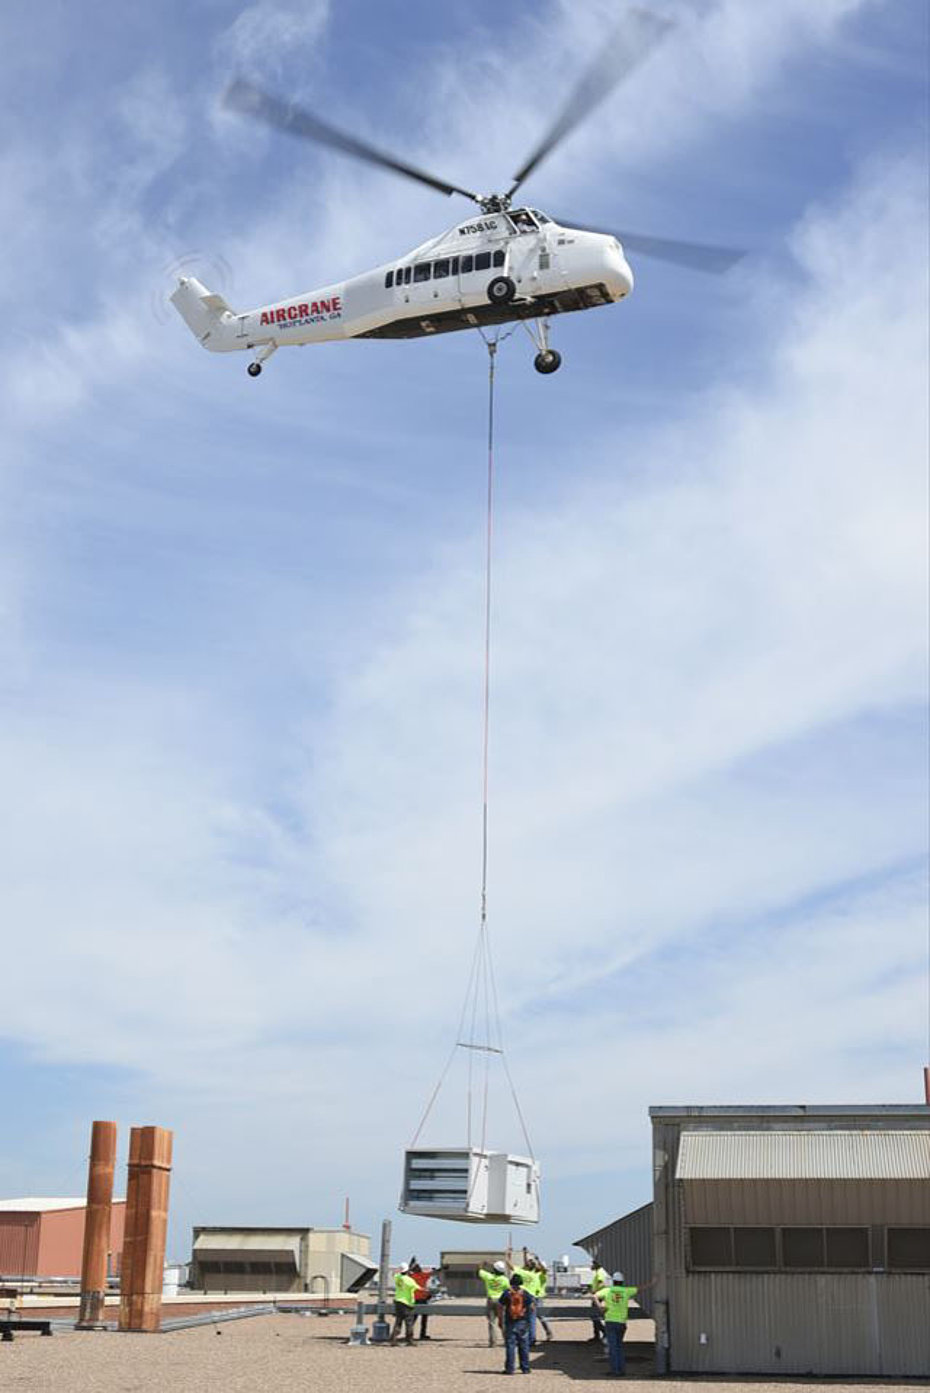 2018 - The Sikorsky S-58JT N758AC in service with Aircrane places an air conditioner onto the roof of a building (web)